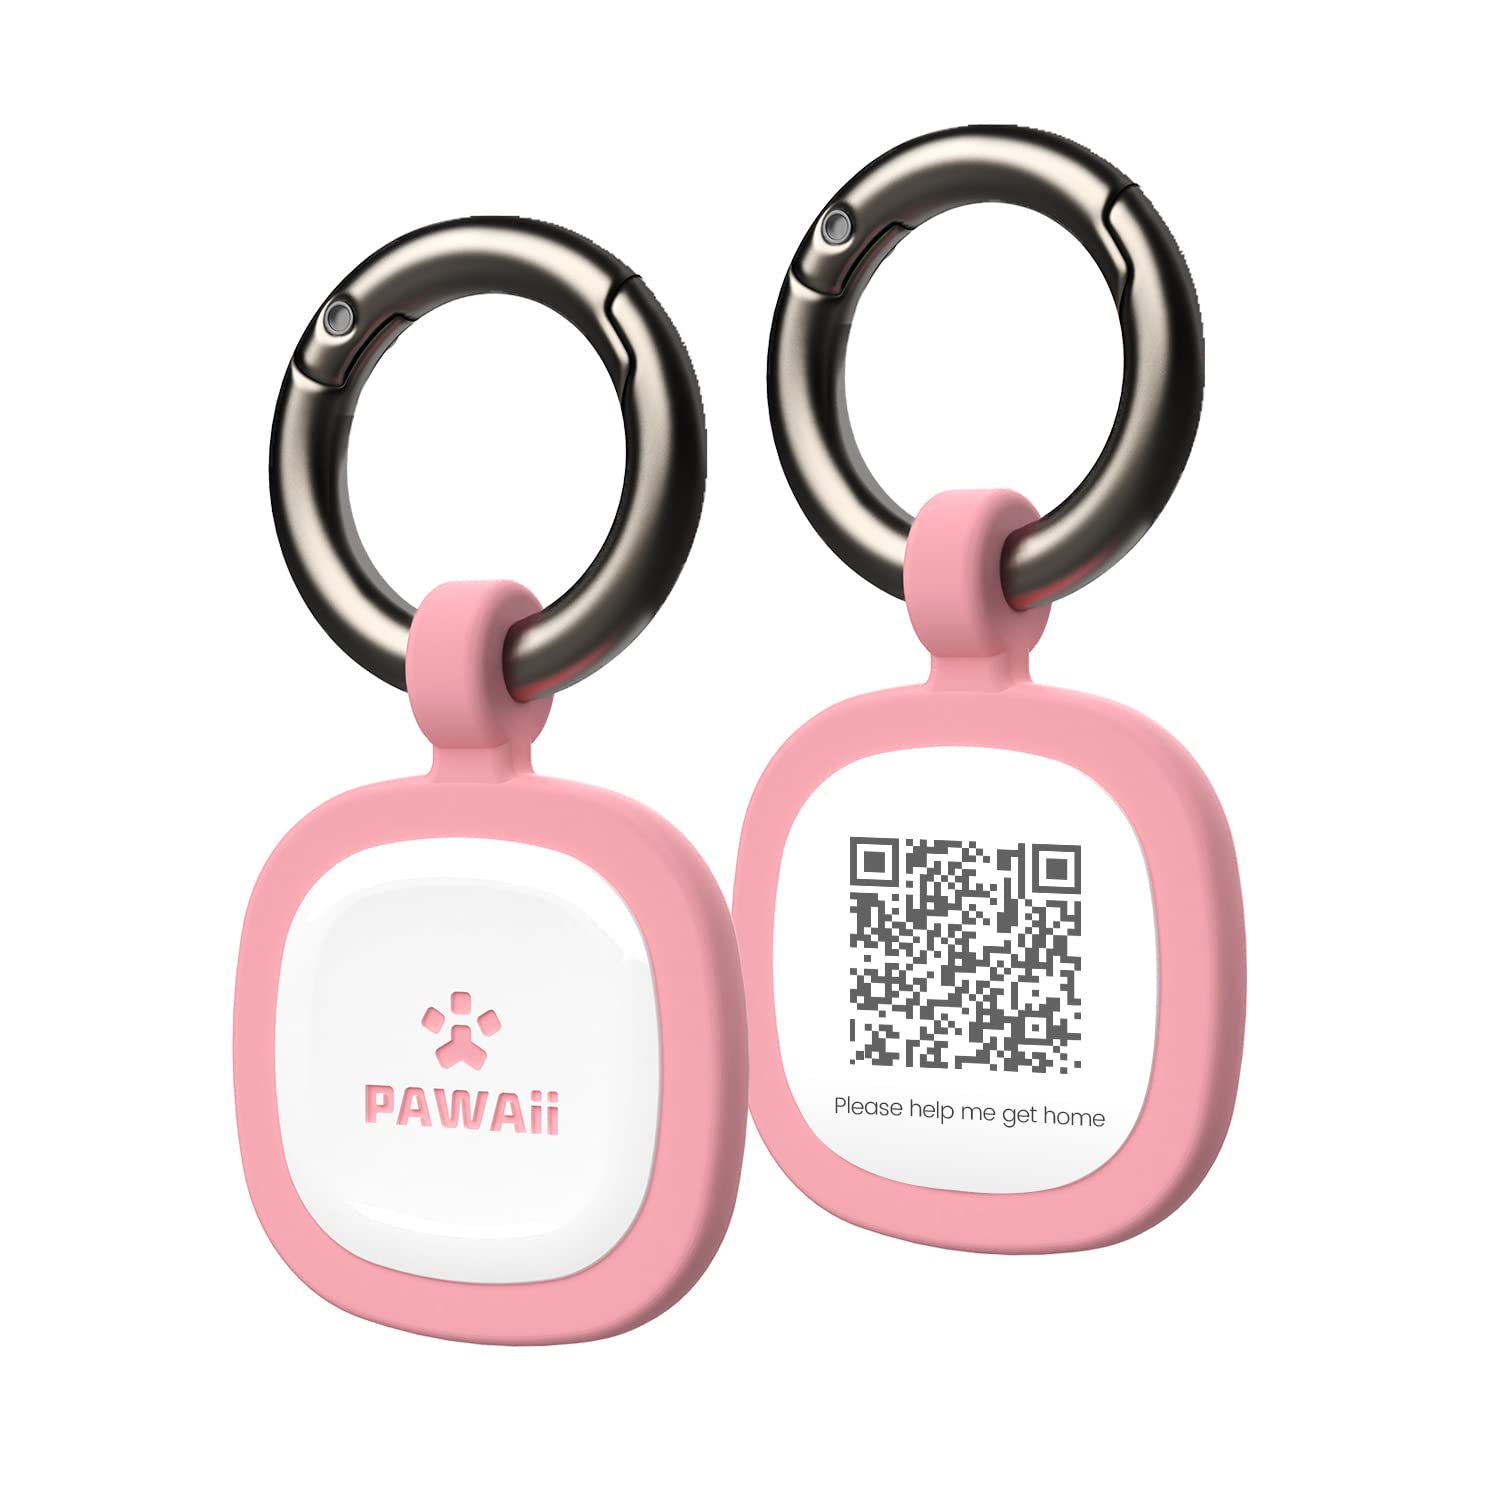 Pawaii Qr Code Pet Id Tag, Dog Tag With Qr Code, Silent Silicone Dog Id Tag, Modifiable Pet Online Profile, Free Online Pet Page